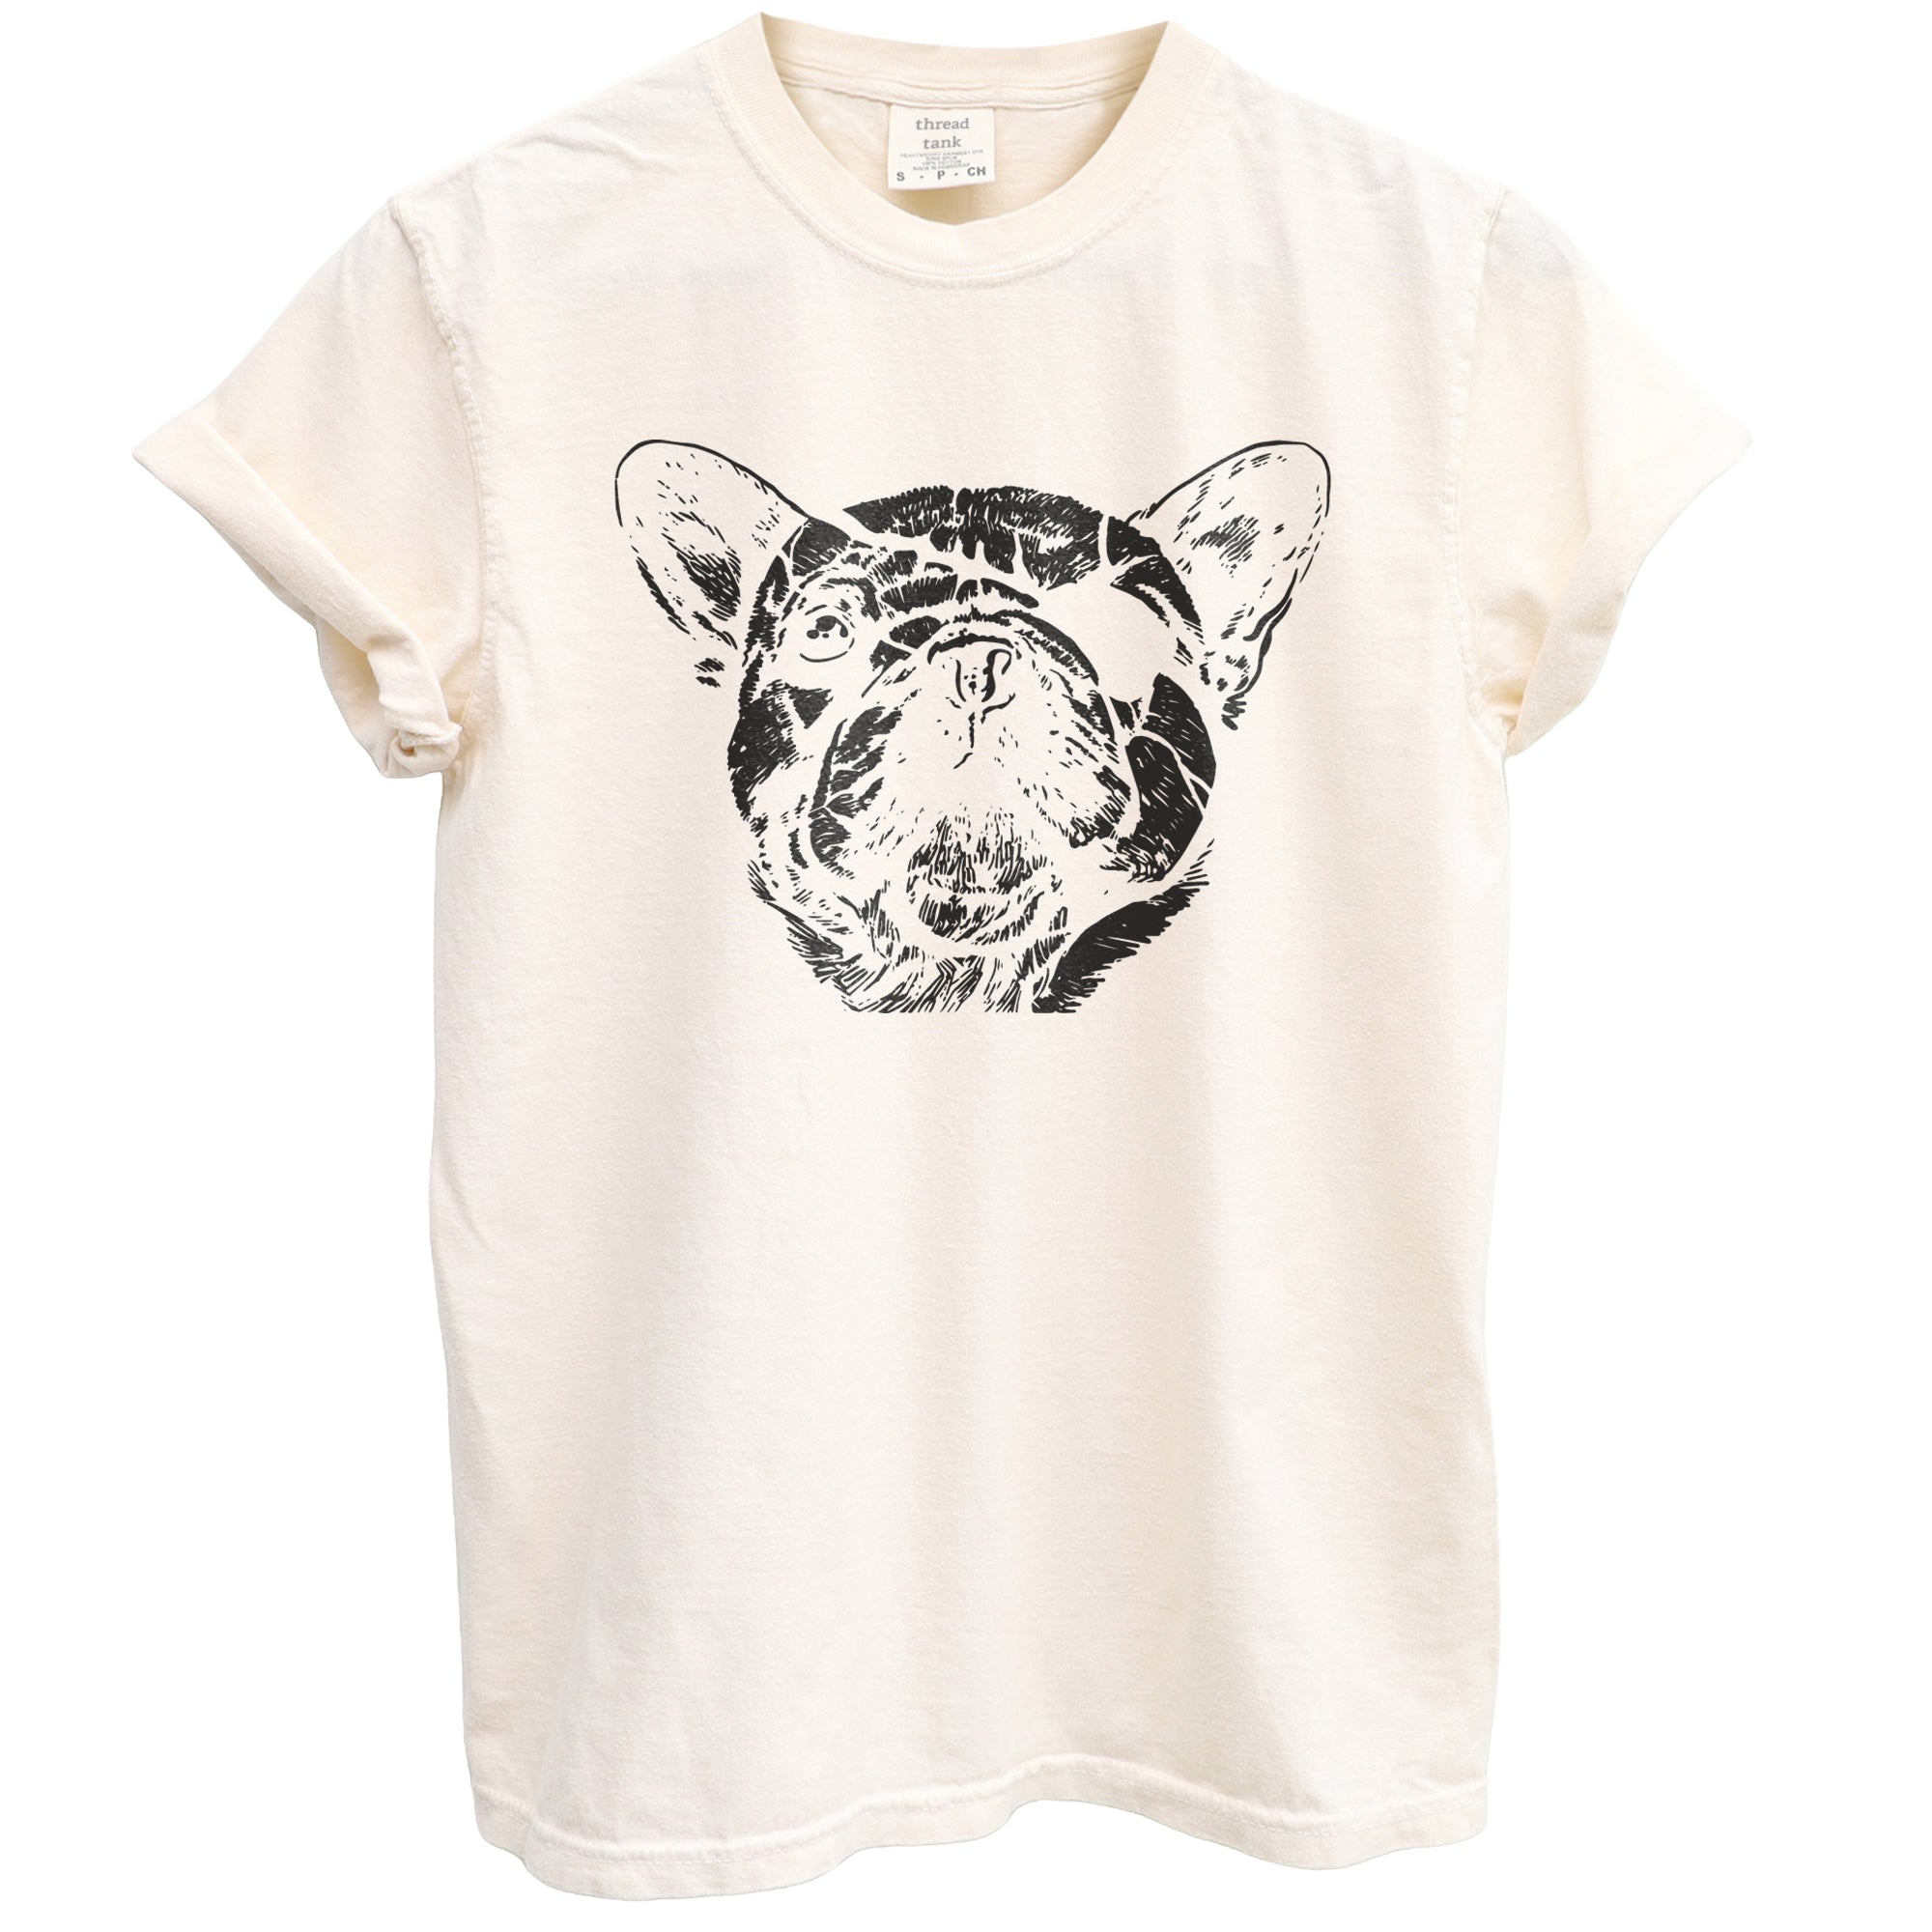 Eye Patch Frenchie Dog Sketch Garment-Dyed Tee - Stories You Can Wear